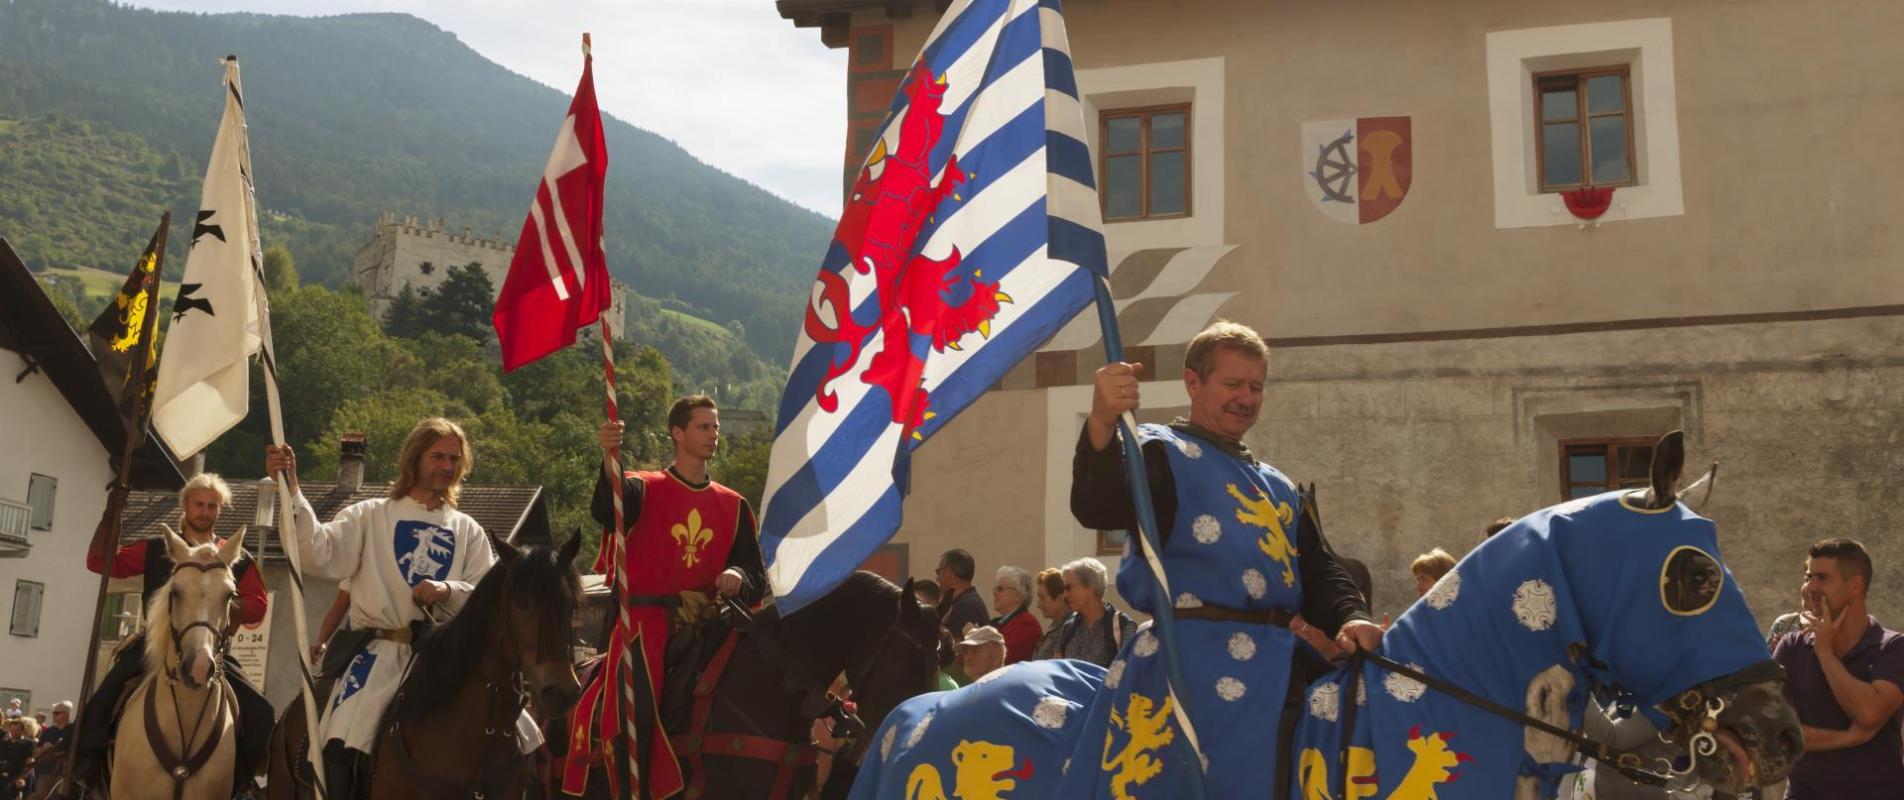 South Tyrolean Knight's Games